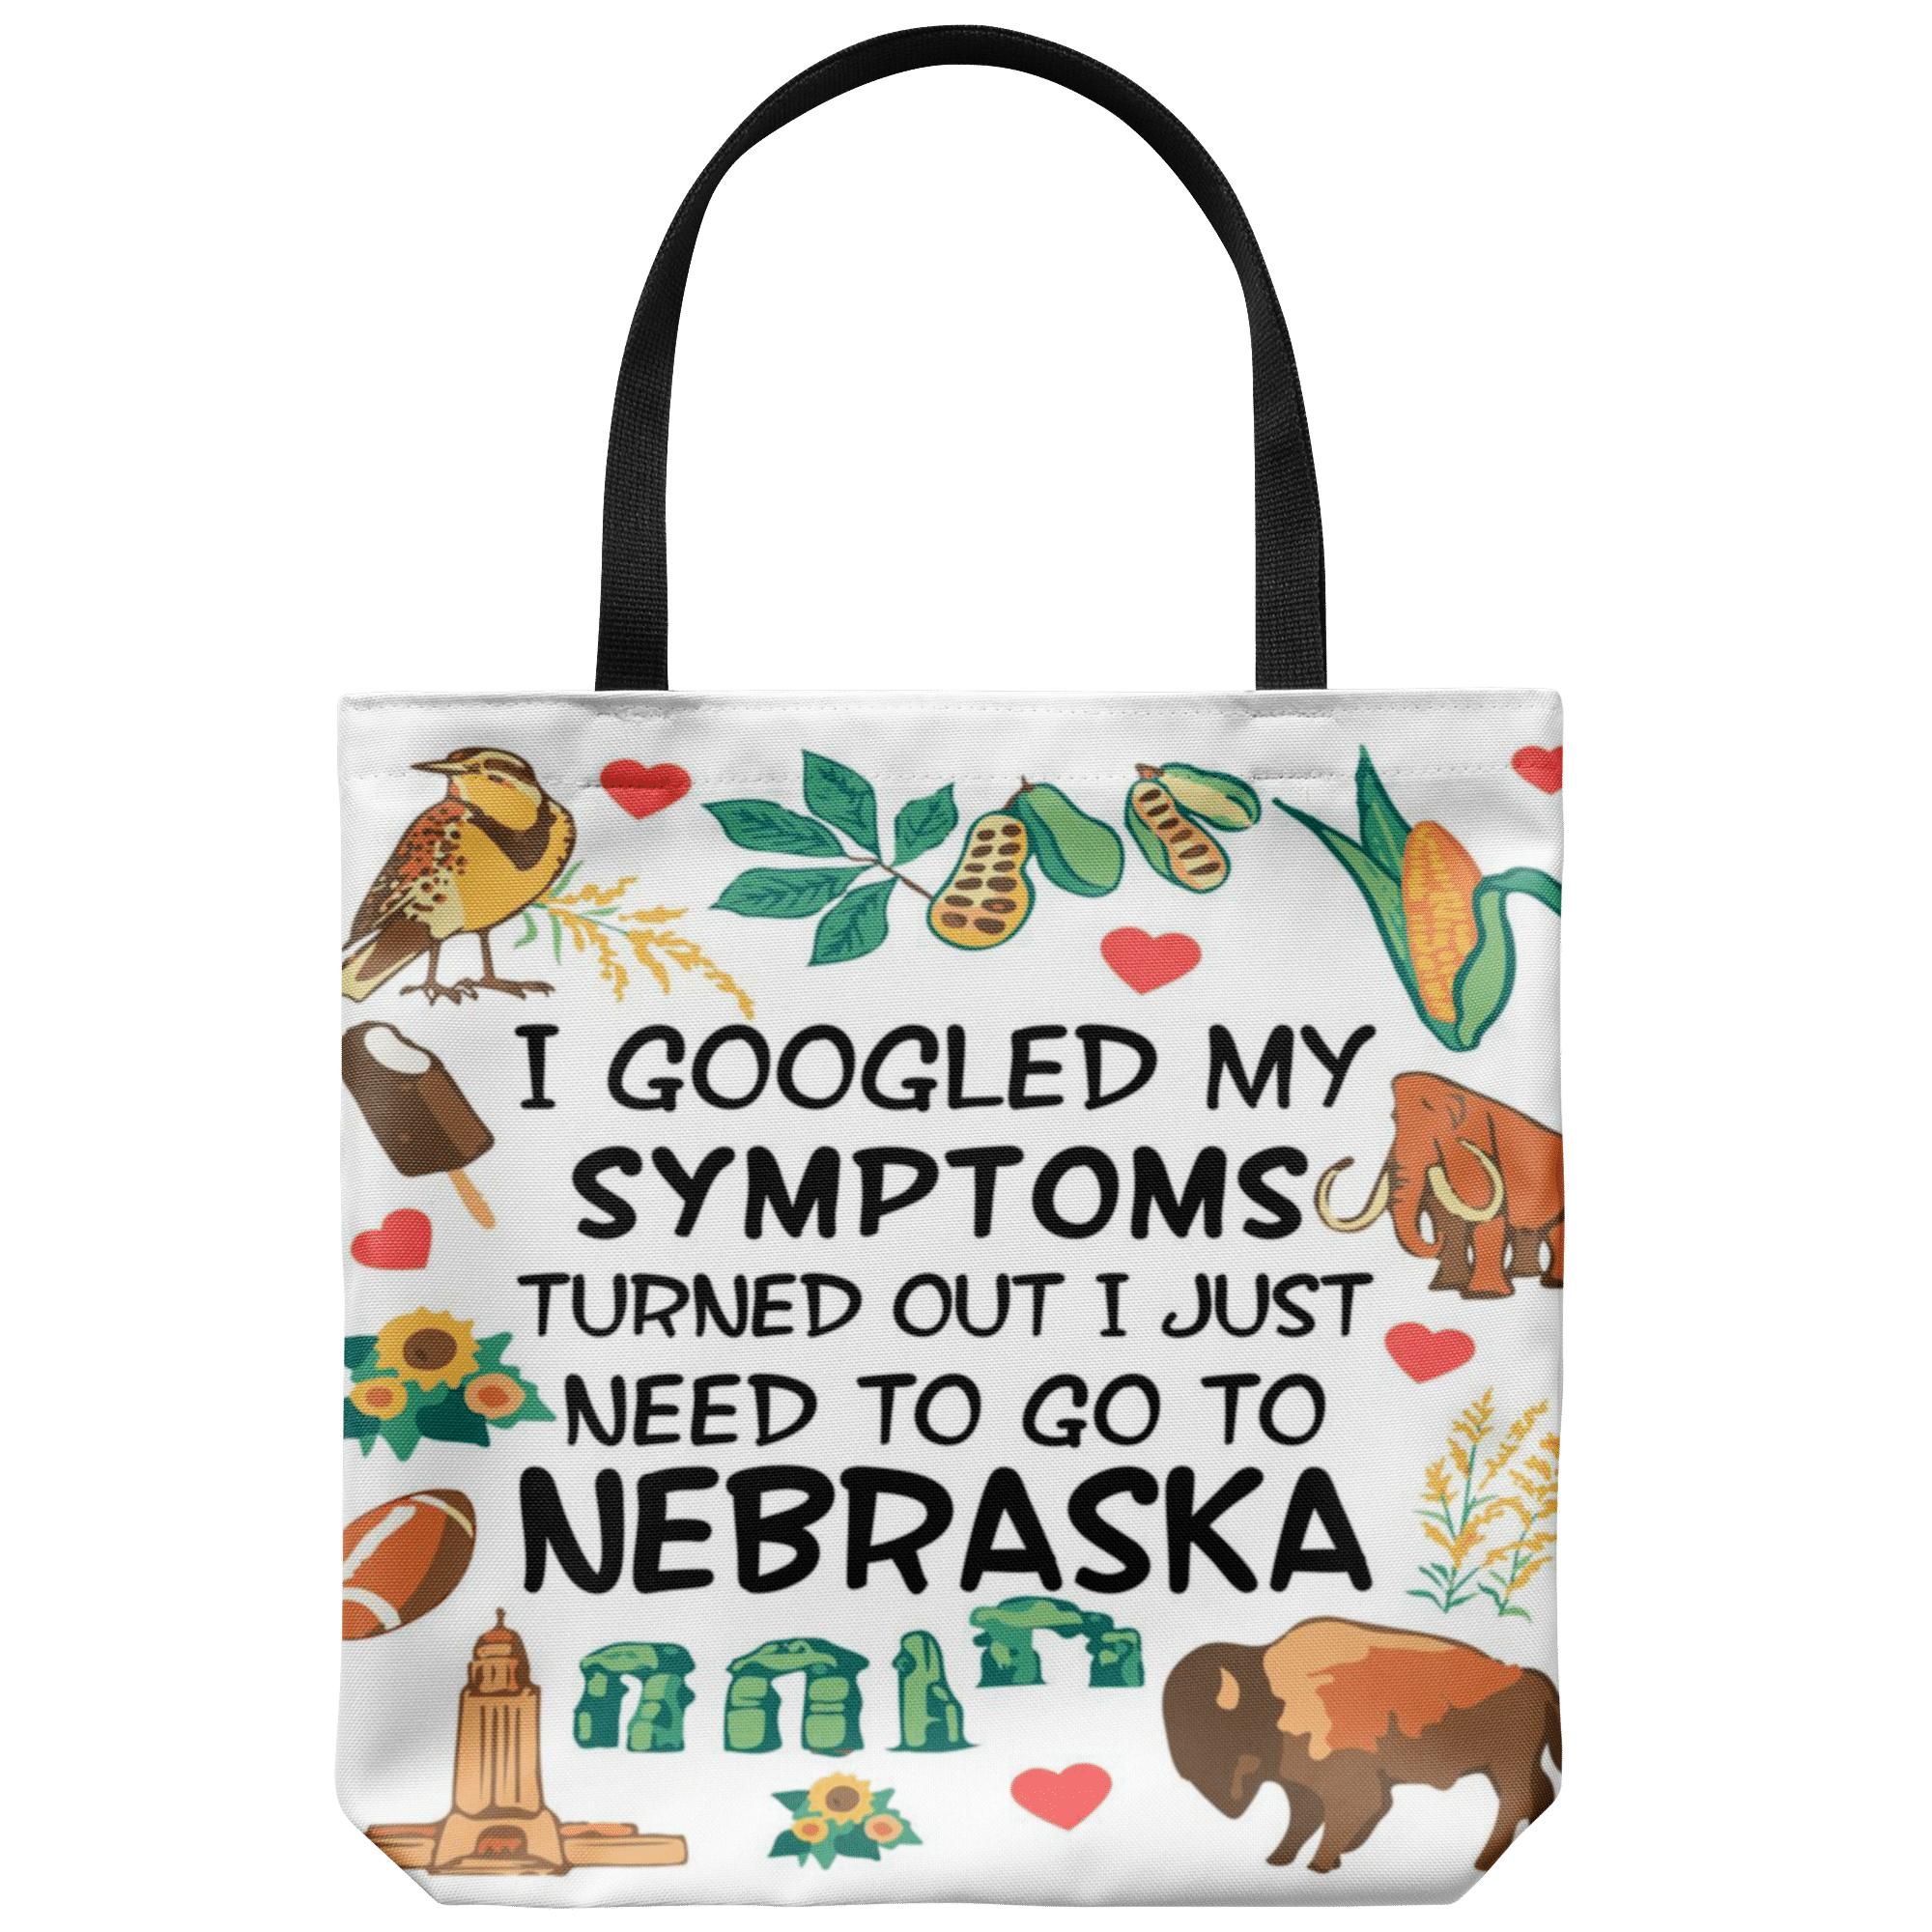 Turn Out I Just Need To Go To Nebraska Tote Bag